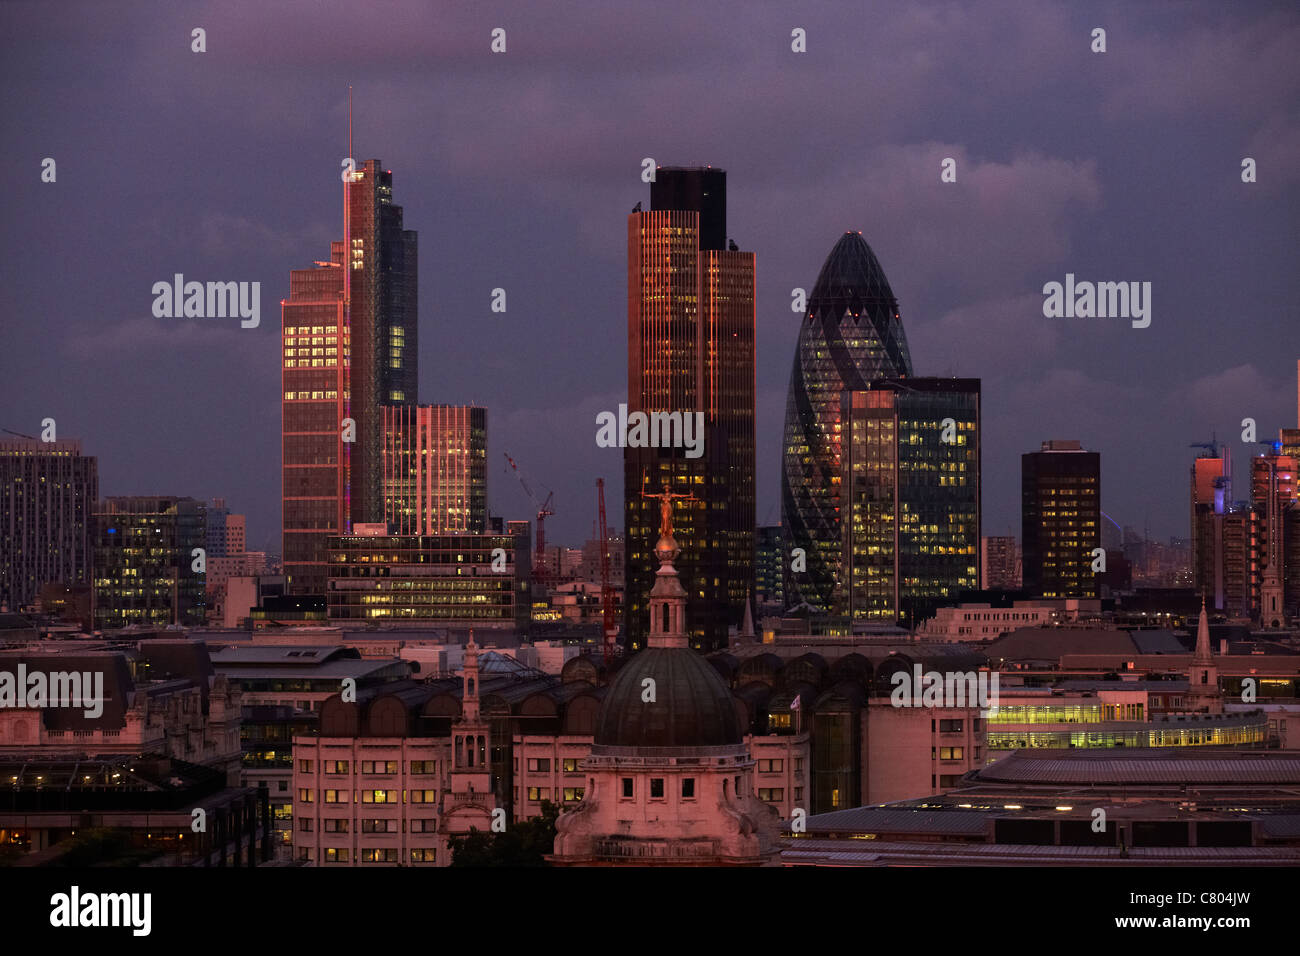 City scape of London at dusk Stock Photo